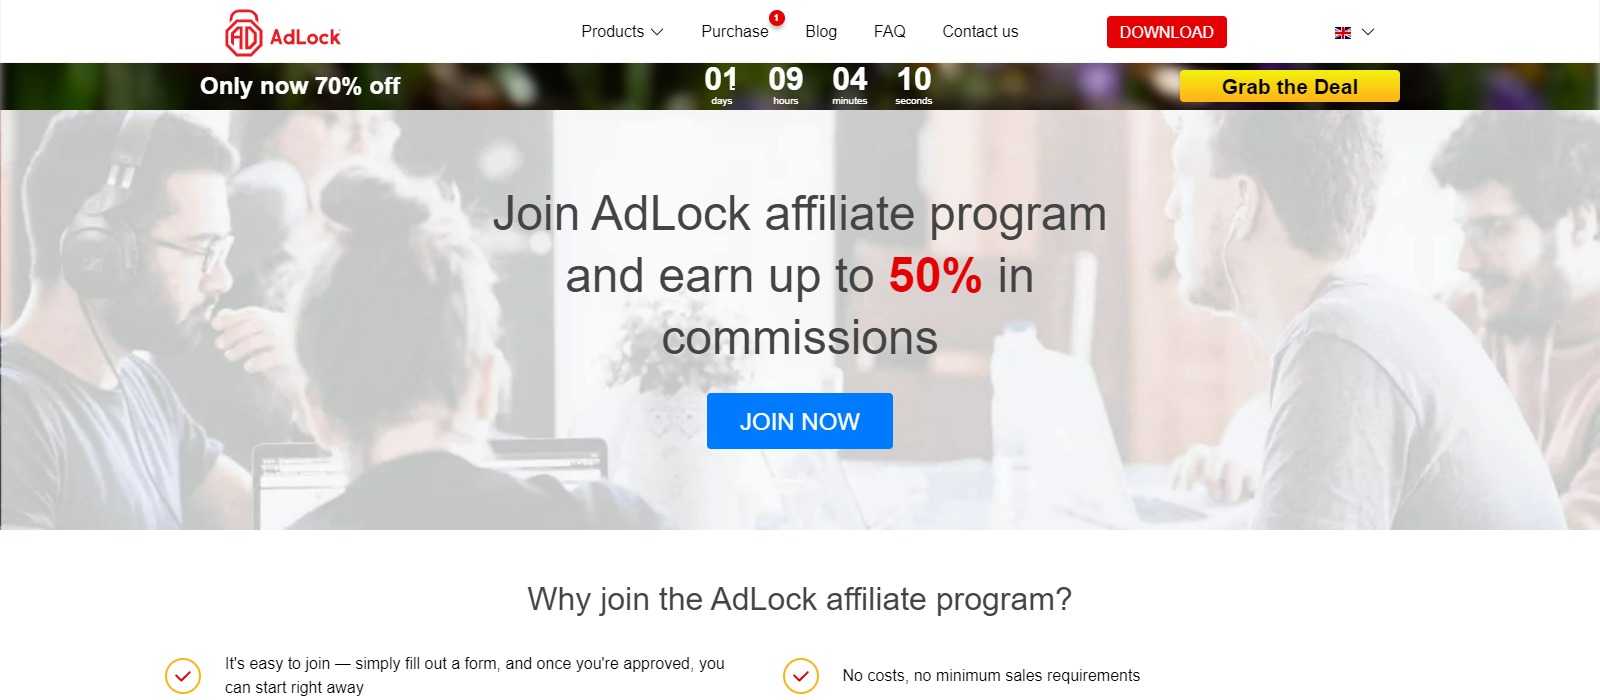 AdLock Affiliate Program Review: Get Earn Up to 50% Commission on each sale